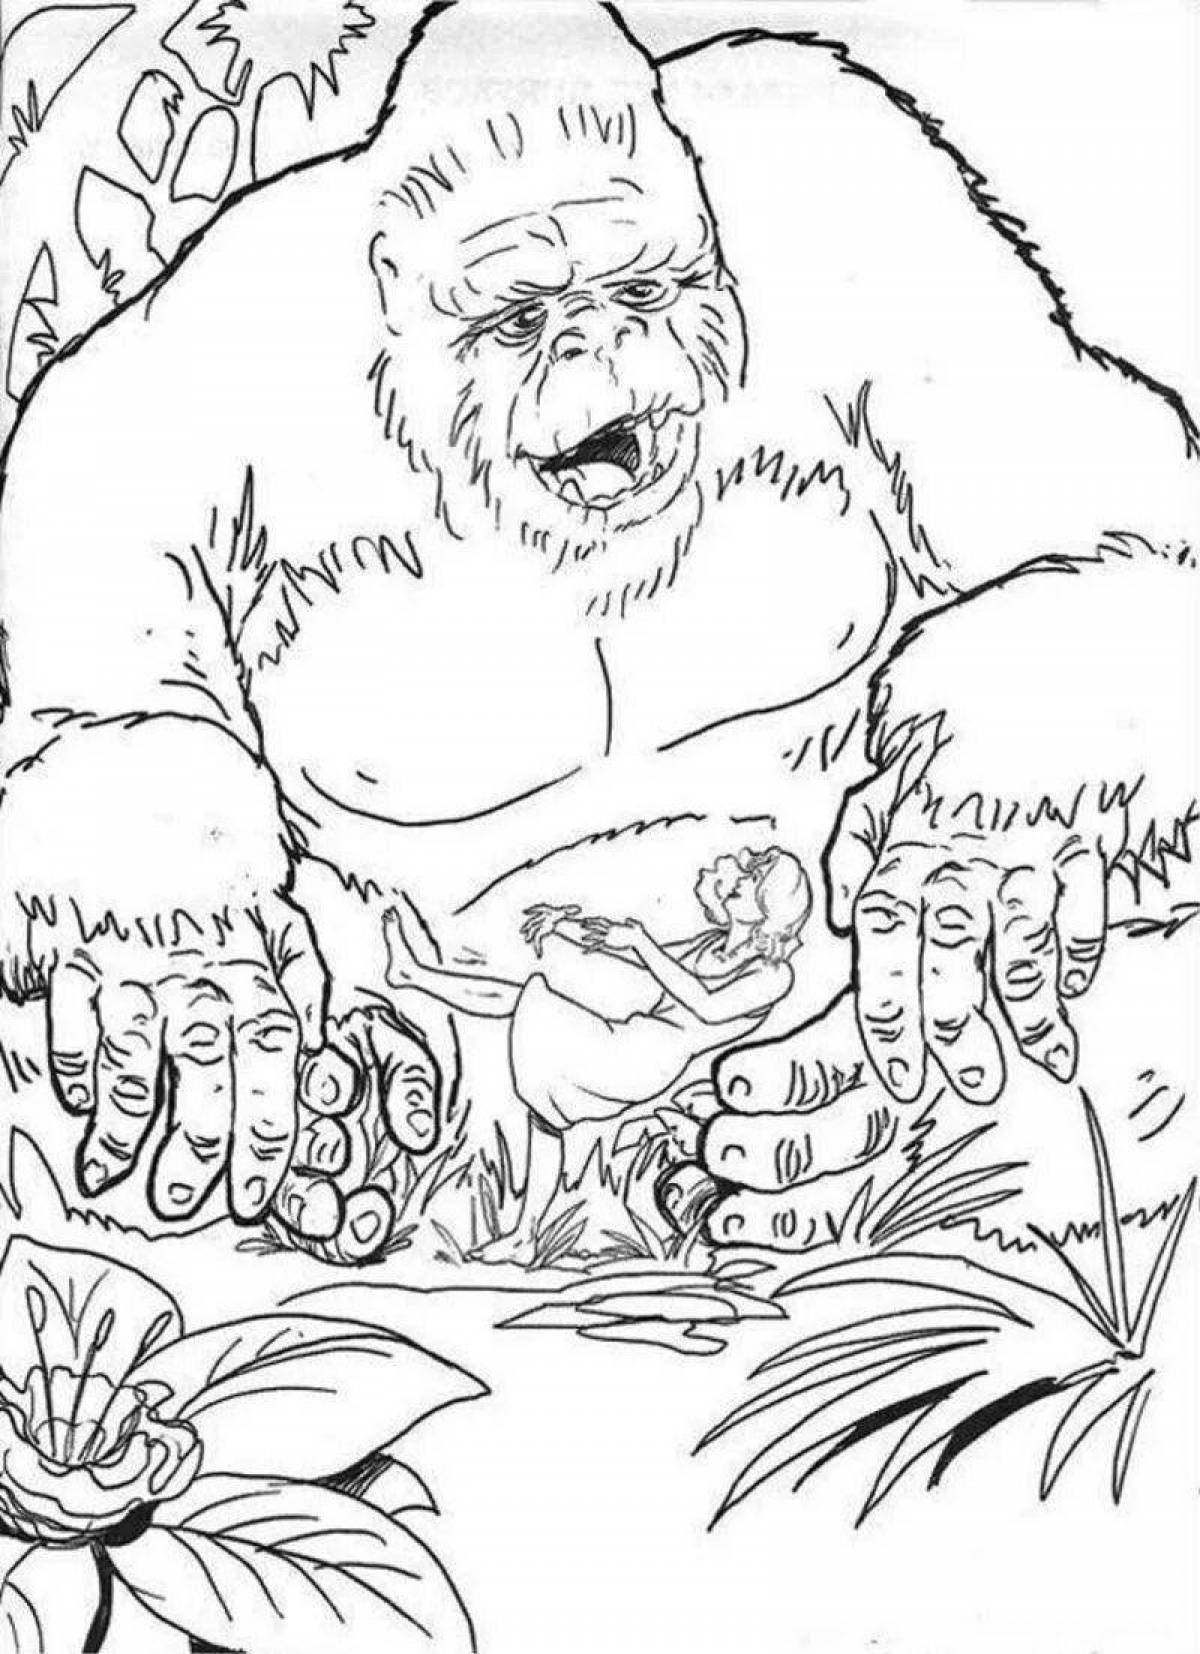 King Kong playful coloring book for kids